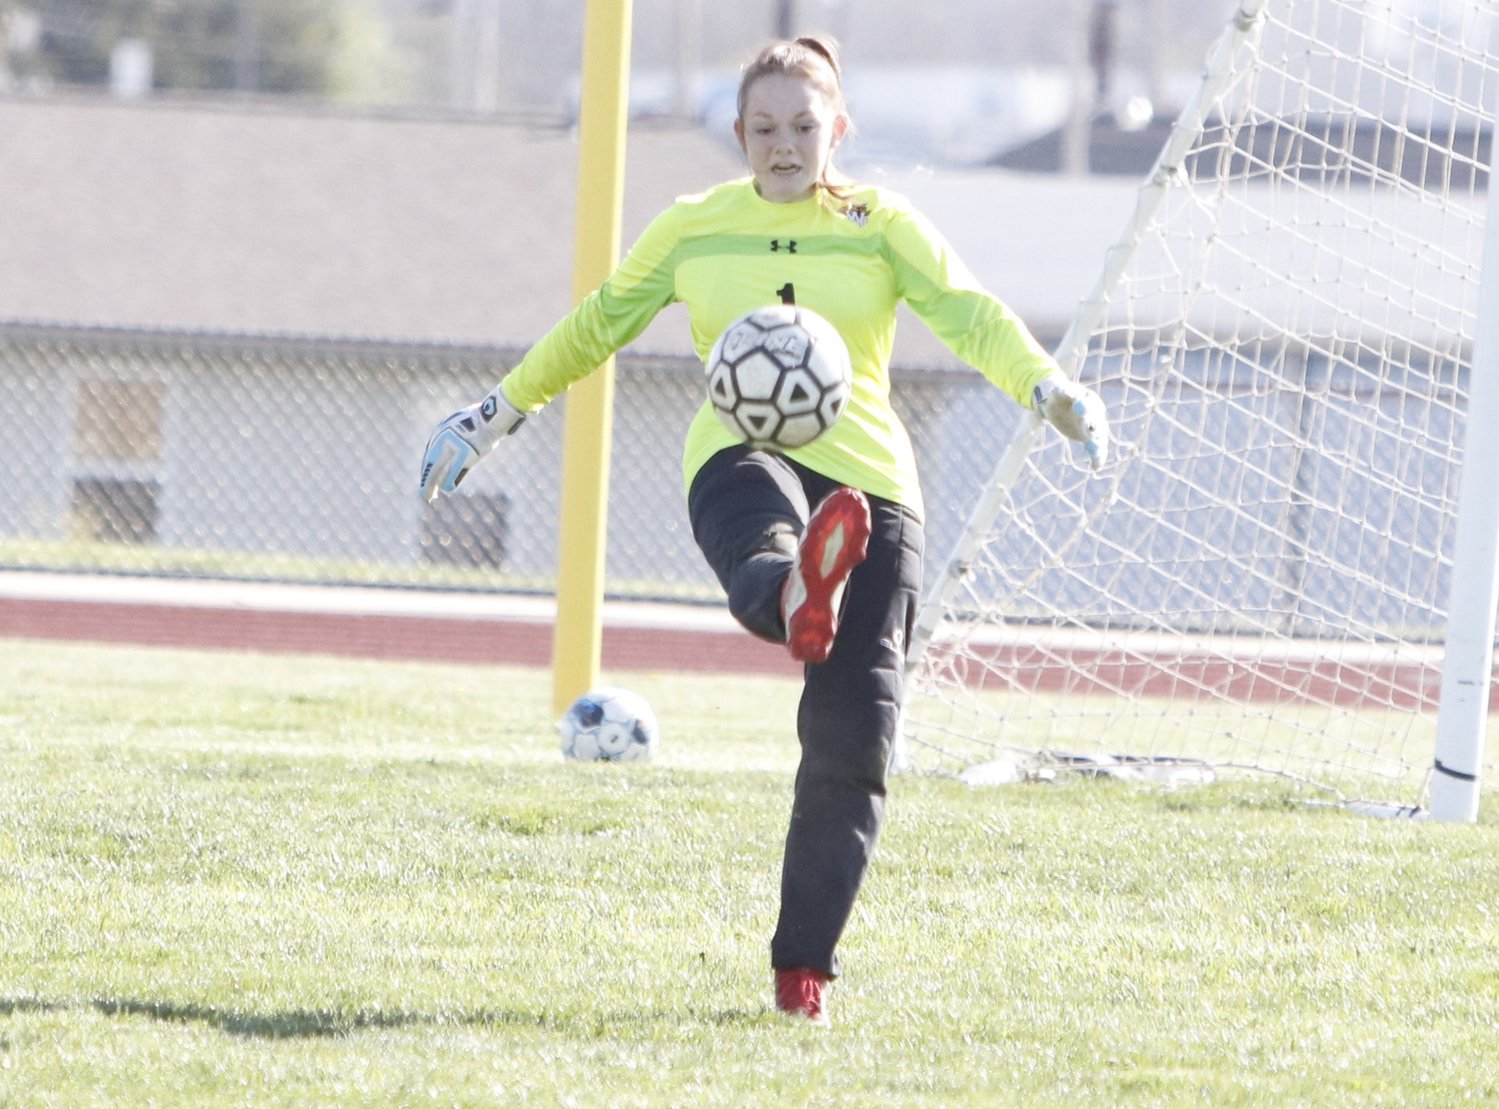 Wright City goalie Cassie Reash kicks the ball after making a save during the first half of Monday’s game.